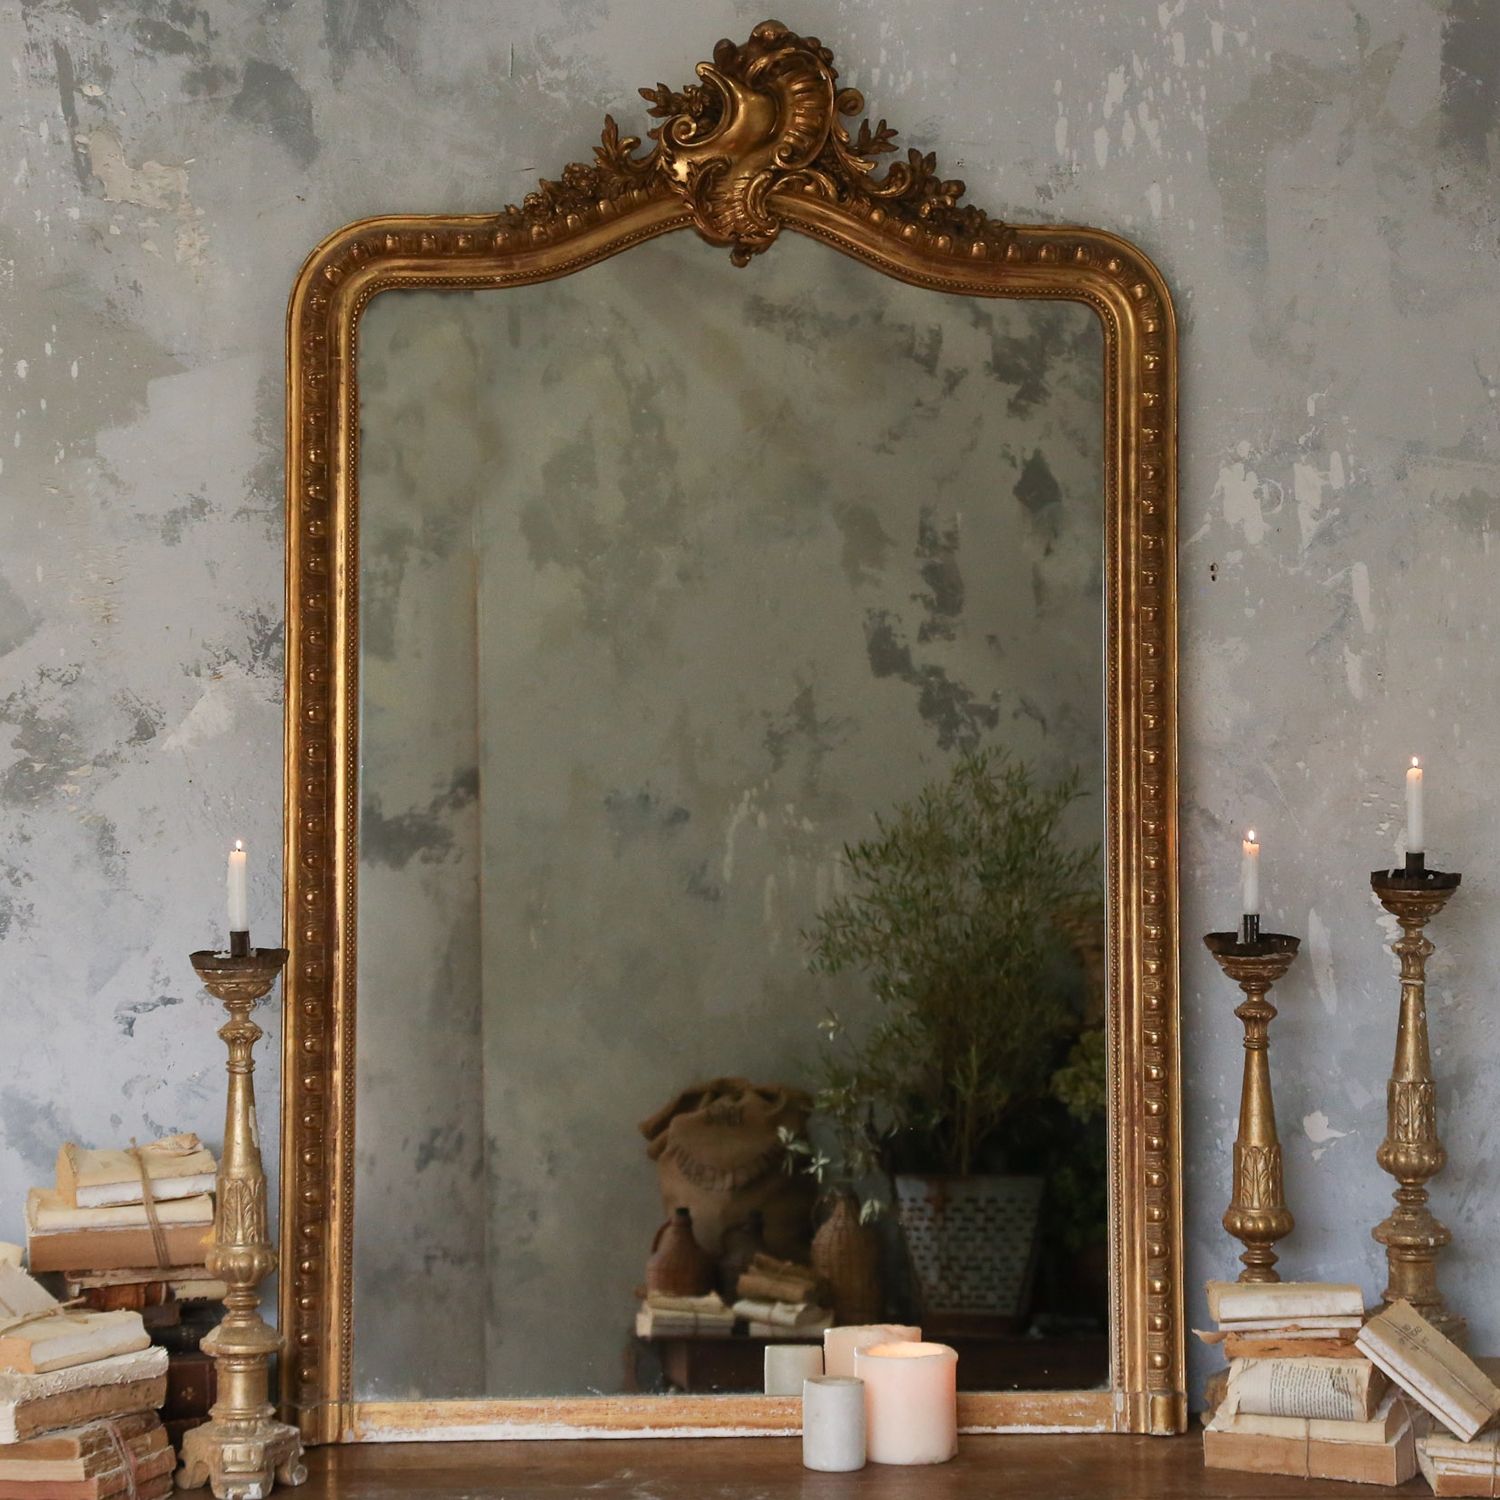 Vintage Mirrors For Sale Rscottlandsurveying Regarding Old Mirrors For Sale (View 8 of 15)